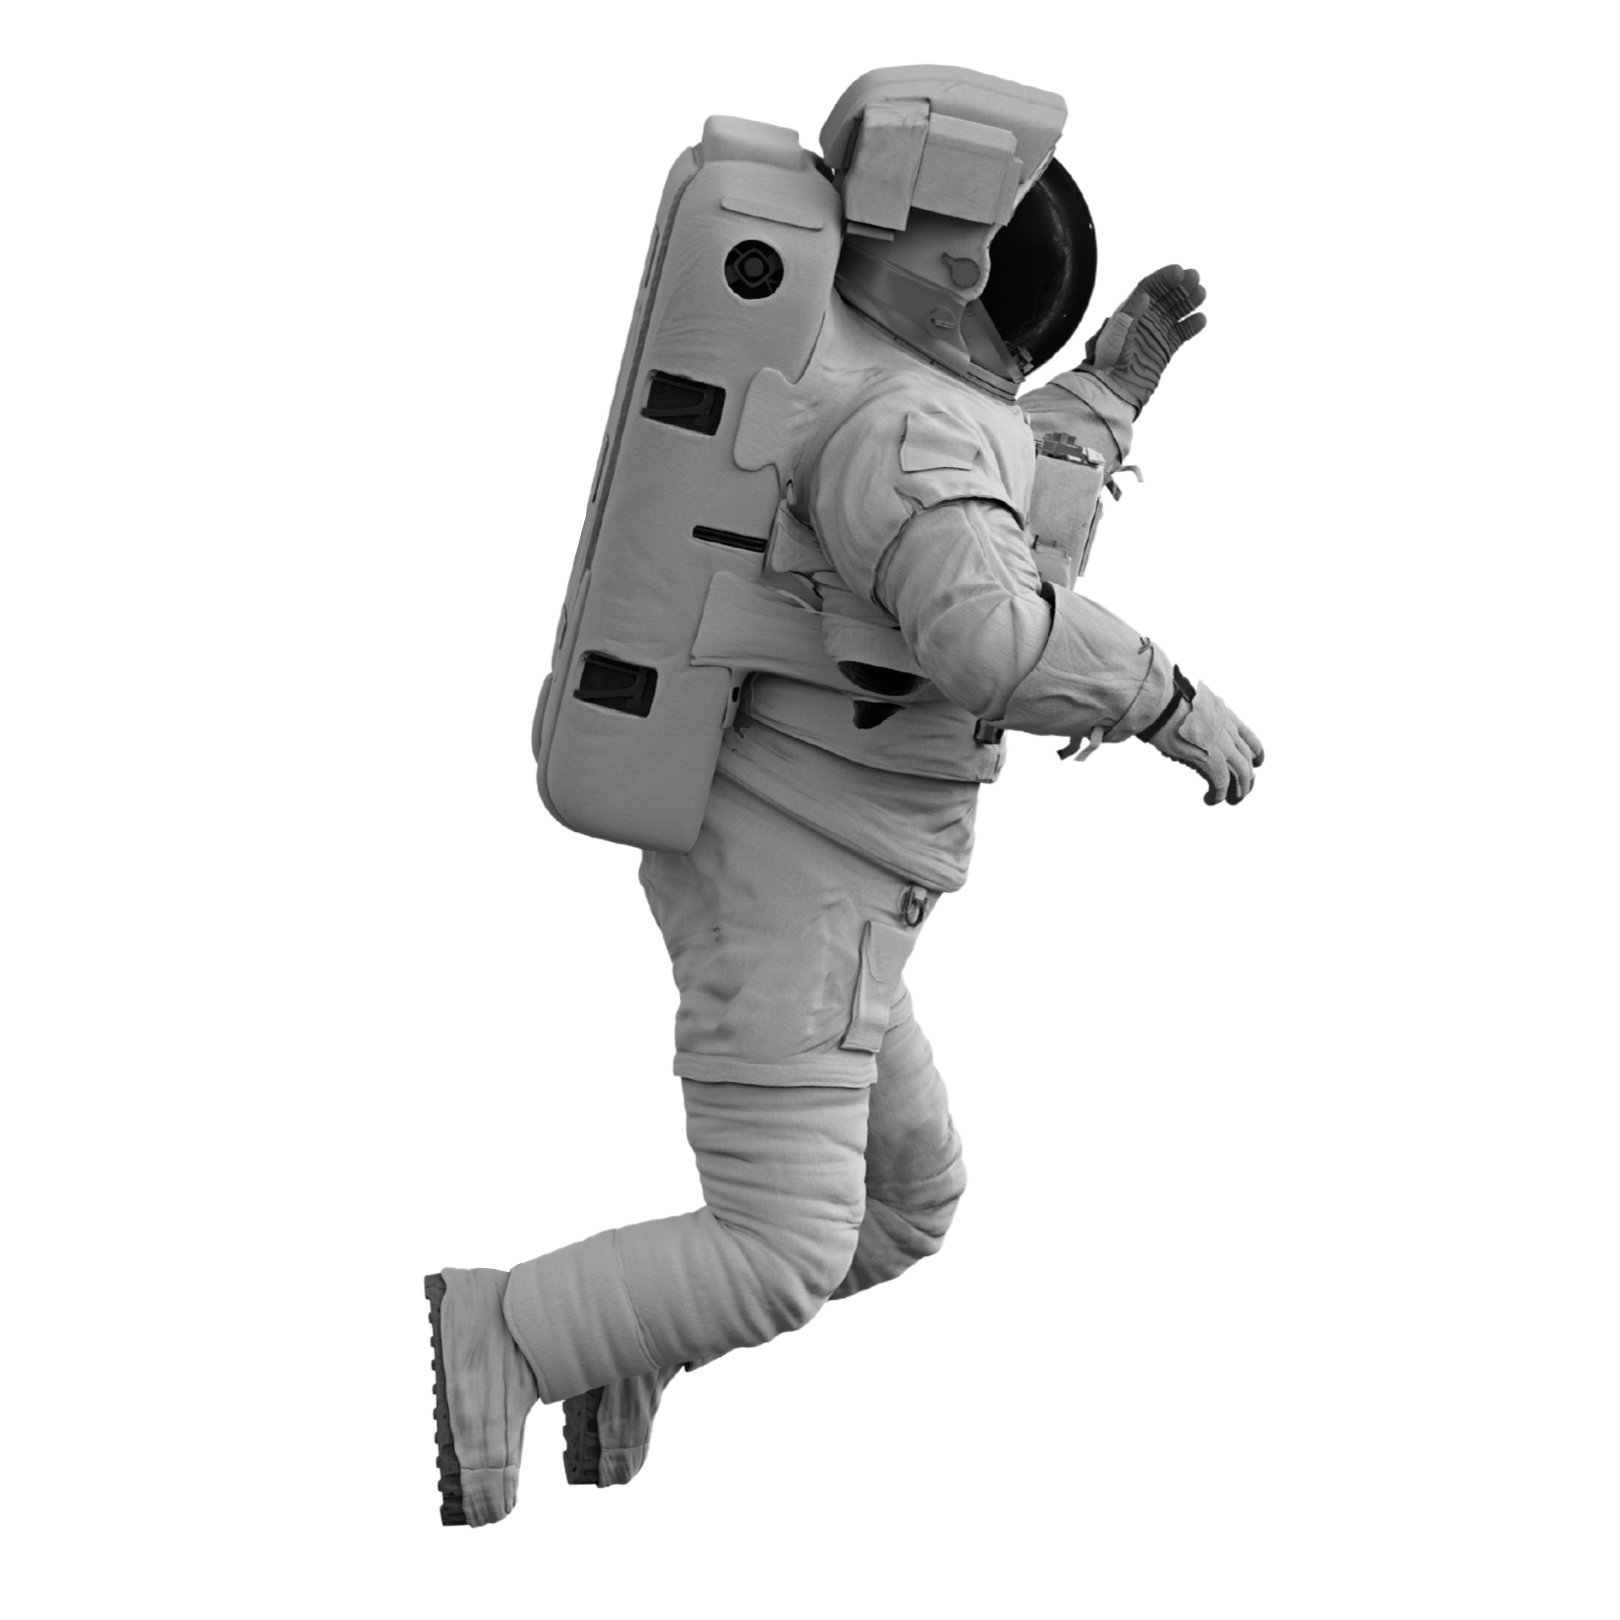 astronaut pointing to menu actions